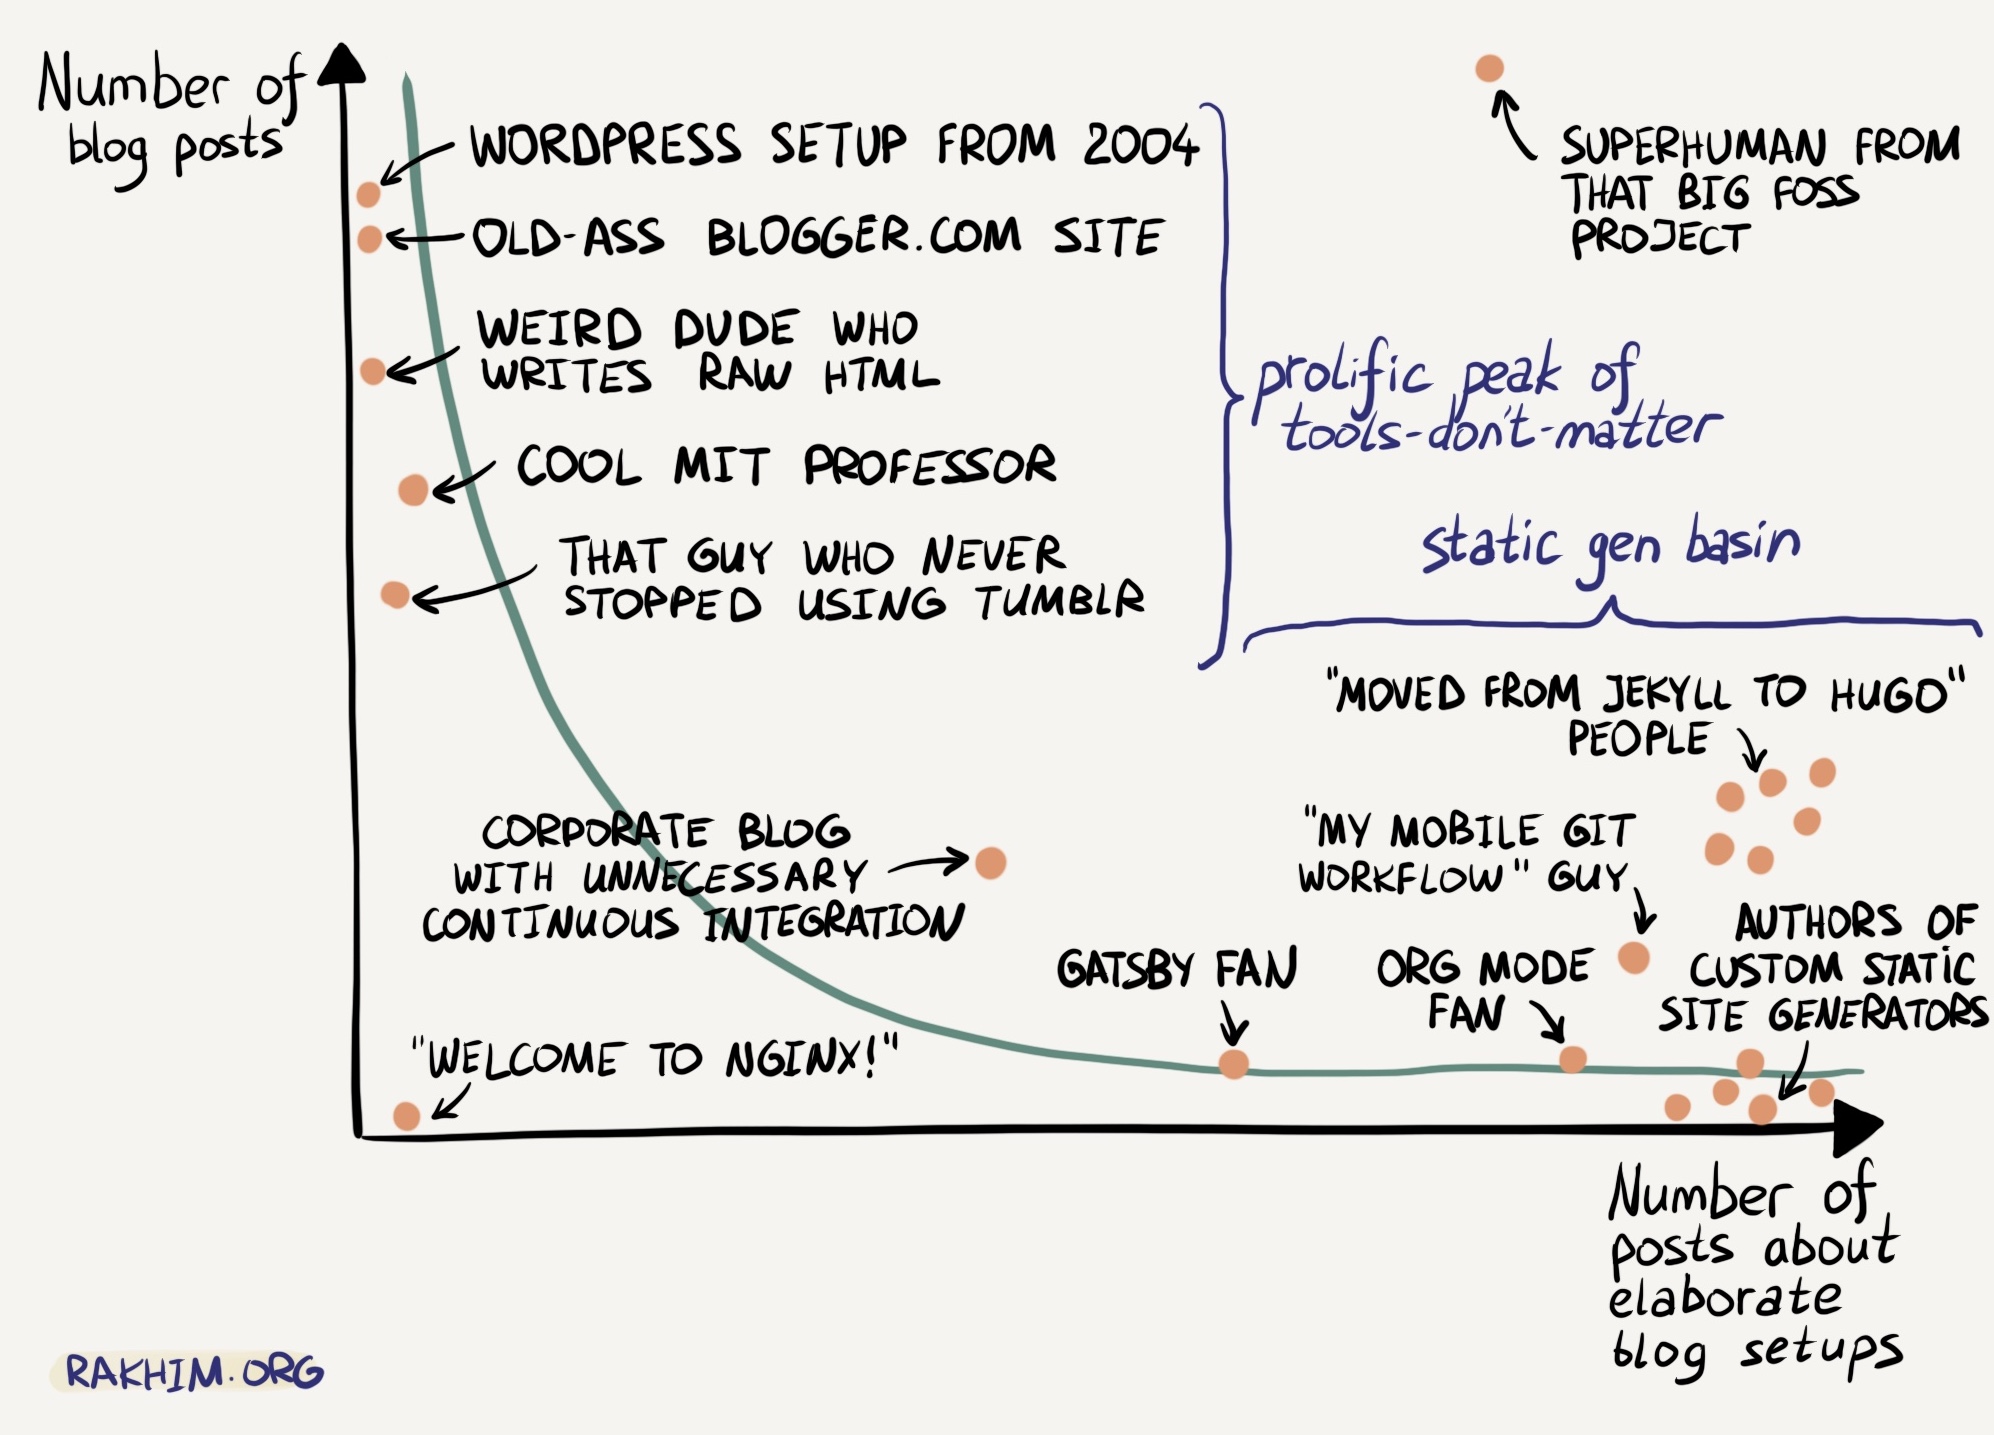 Comic about blogging and blogging tools, illustrated using a chart with vertical axis for number of blog posts, and horizontal axis for number of posts about elaborate blog setups, with various tools plotted at various points.